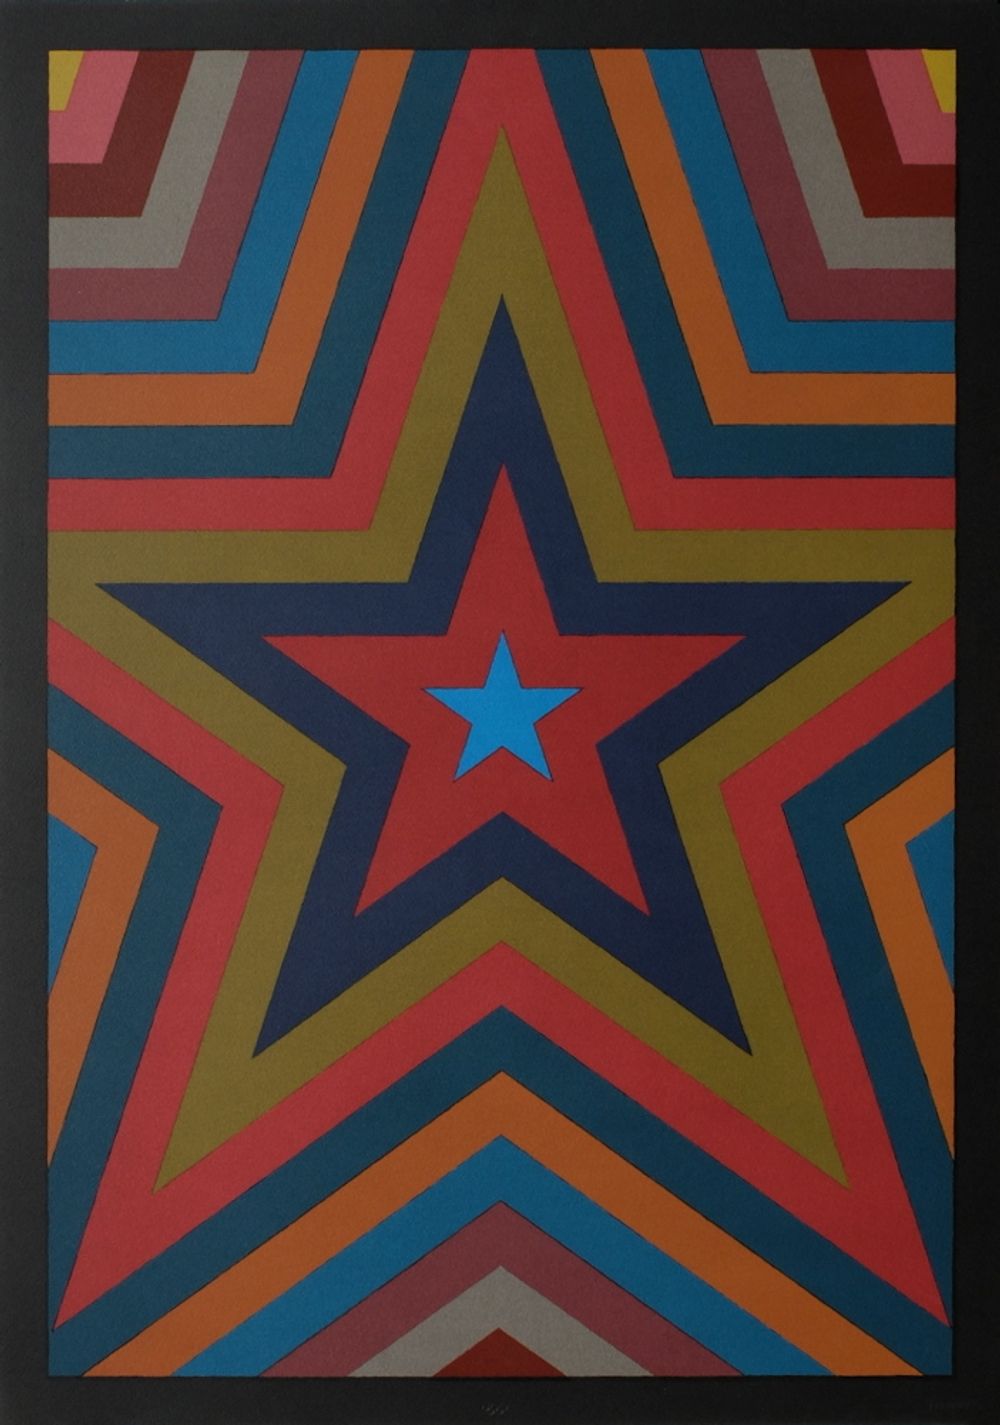 Five Pointed Star with Color Bands (Barcelona)